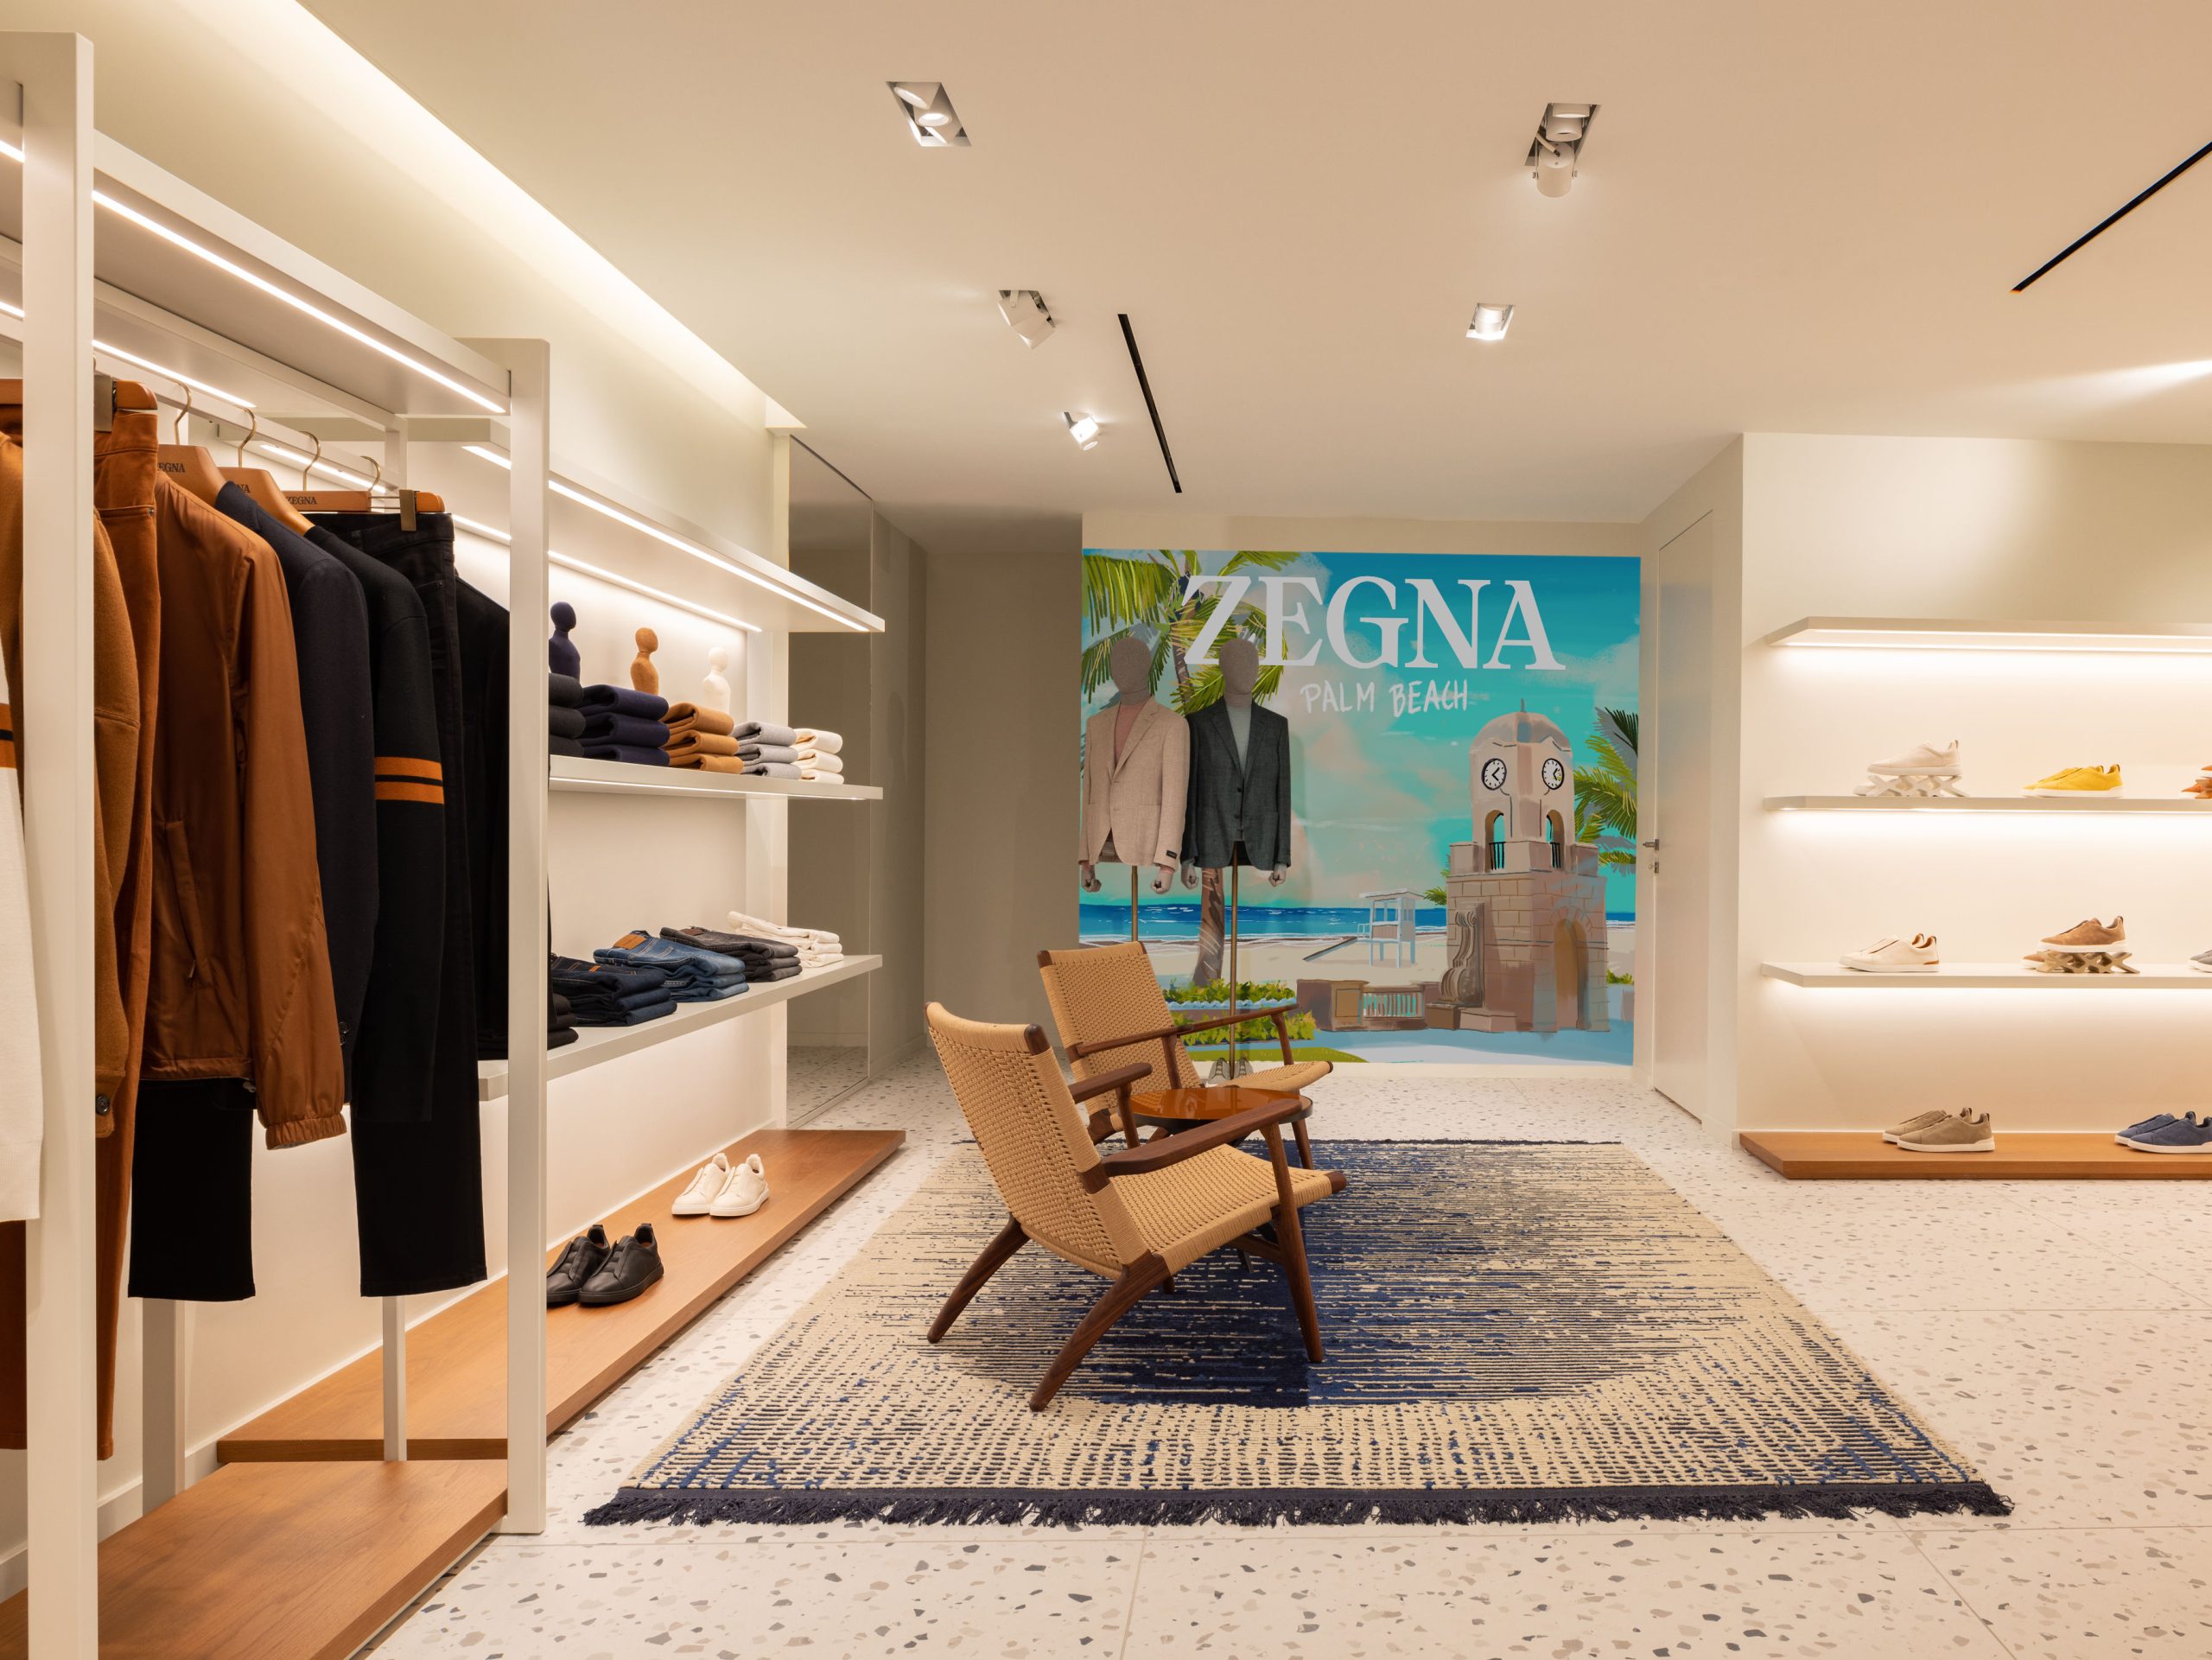 Zegna Opens New Palm Beach Store